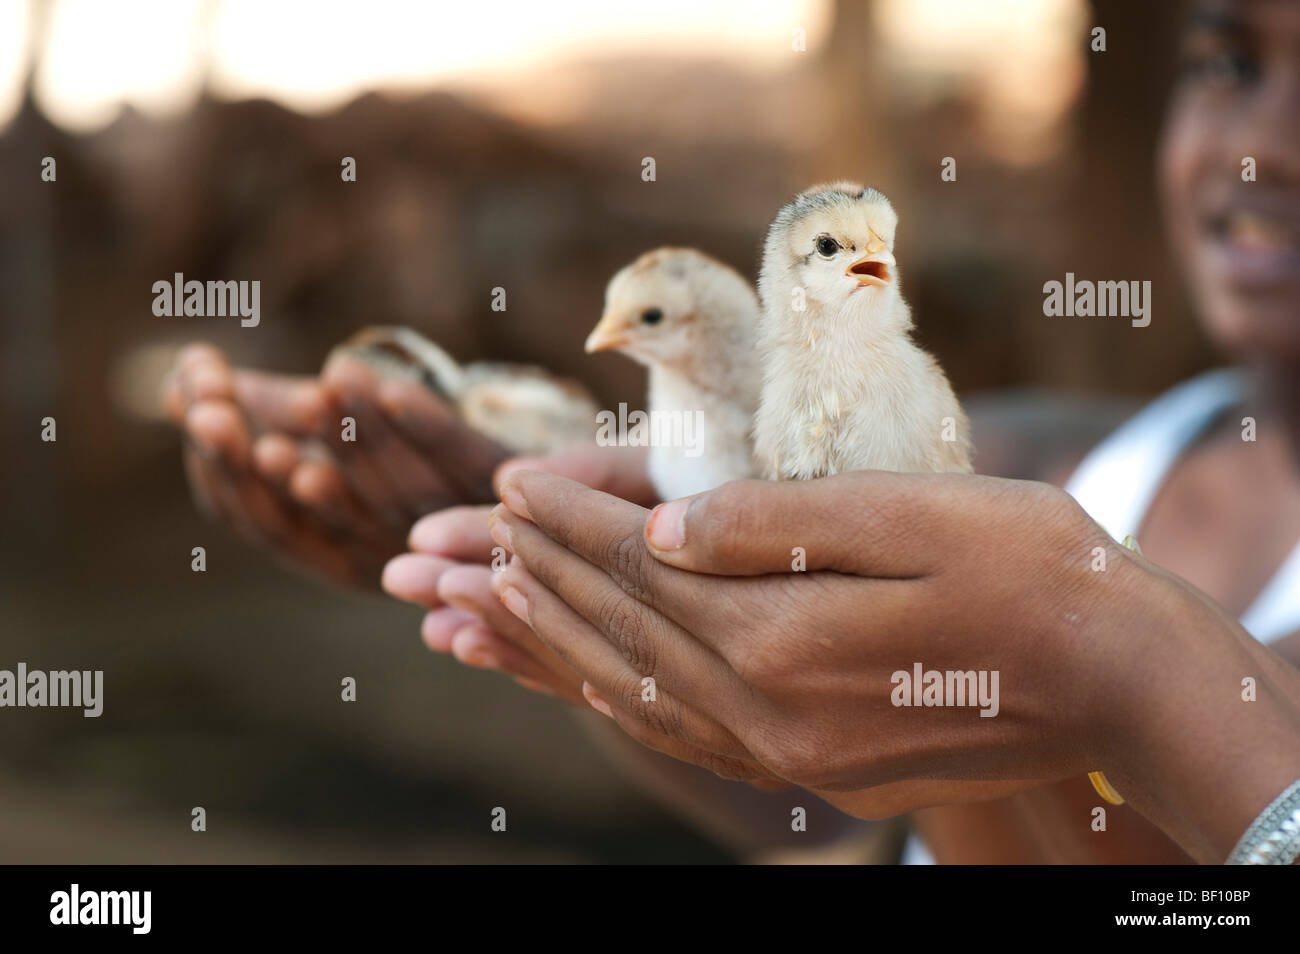 Young indian girls with chicks in the palm of their hands. Andhra Pradesh, India Stock Photo